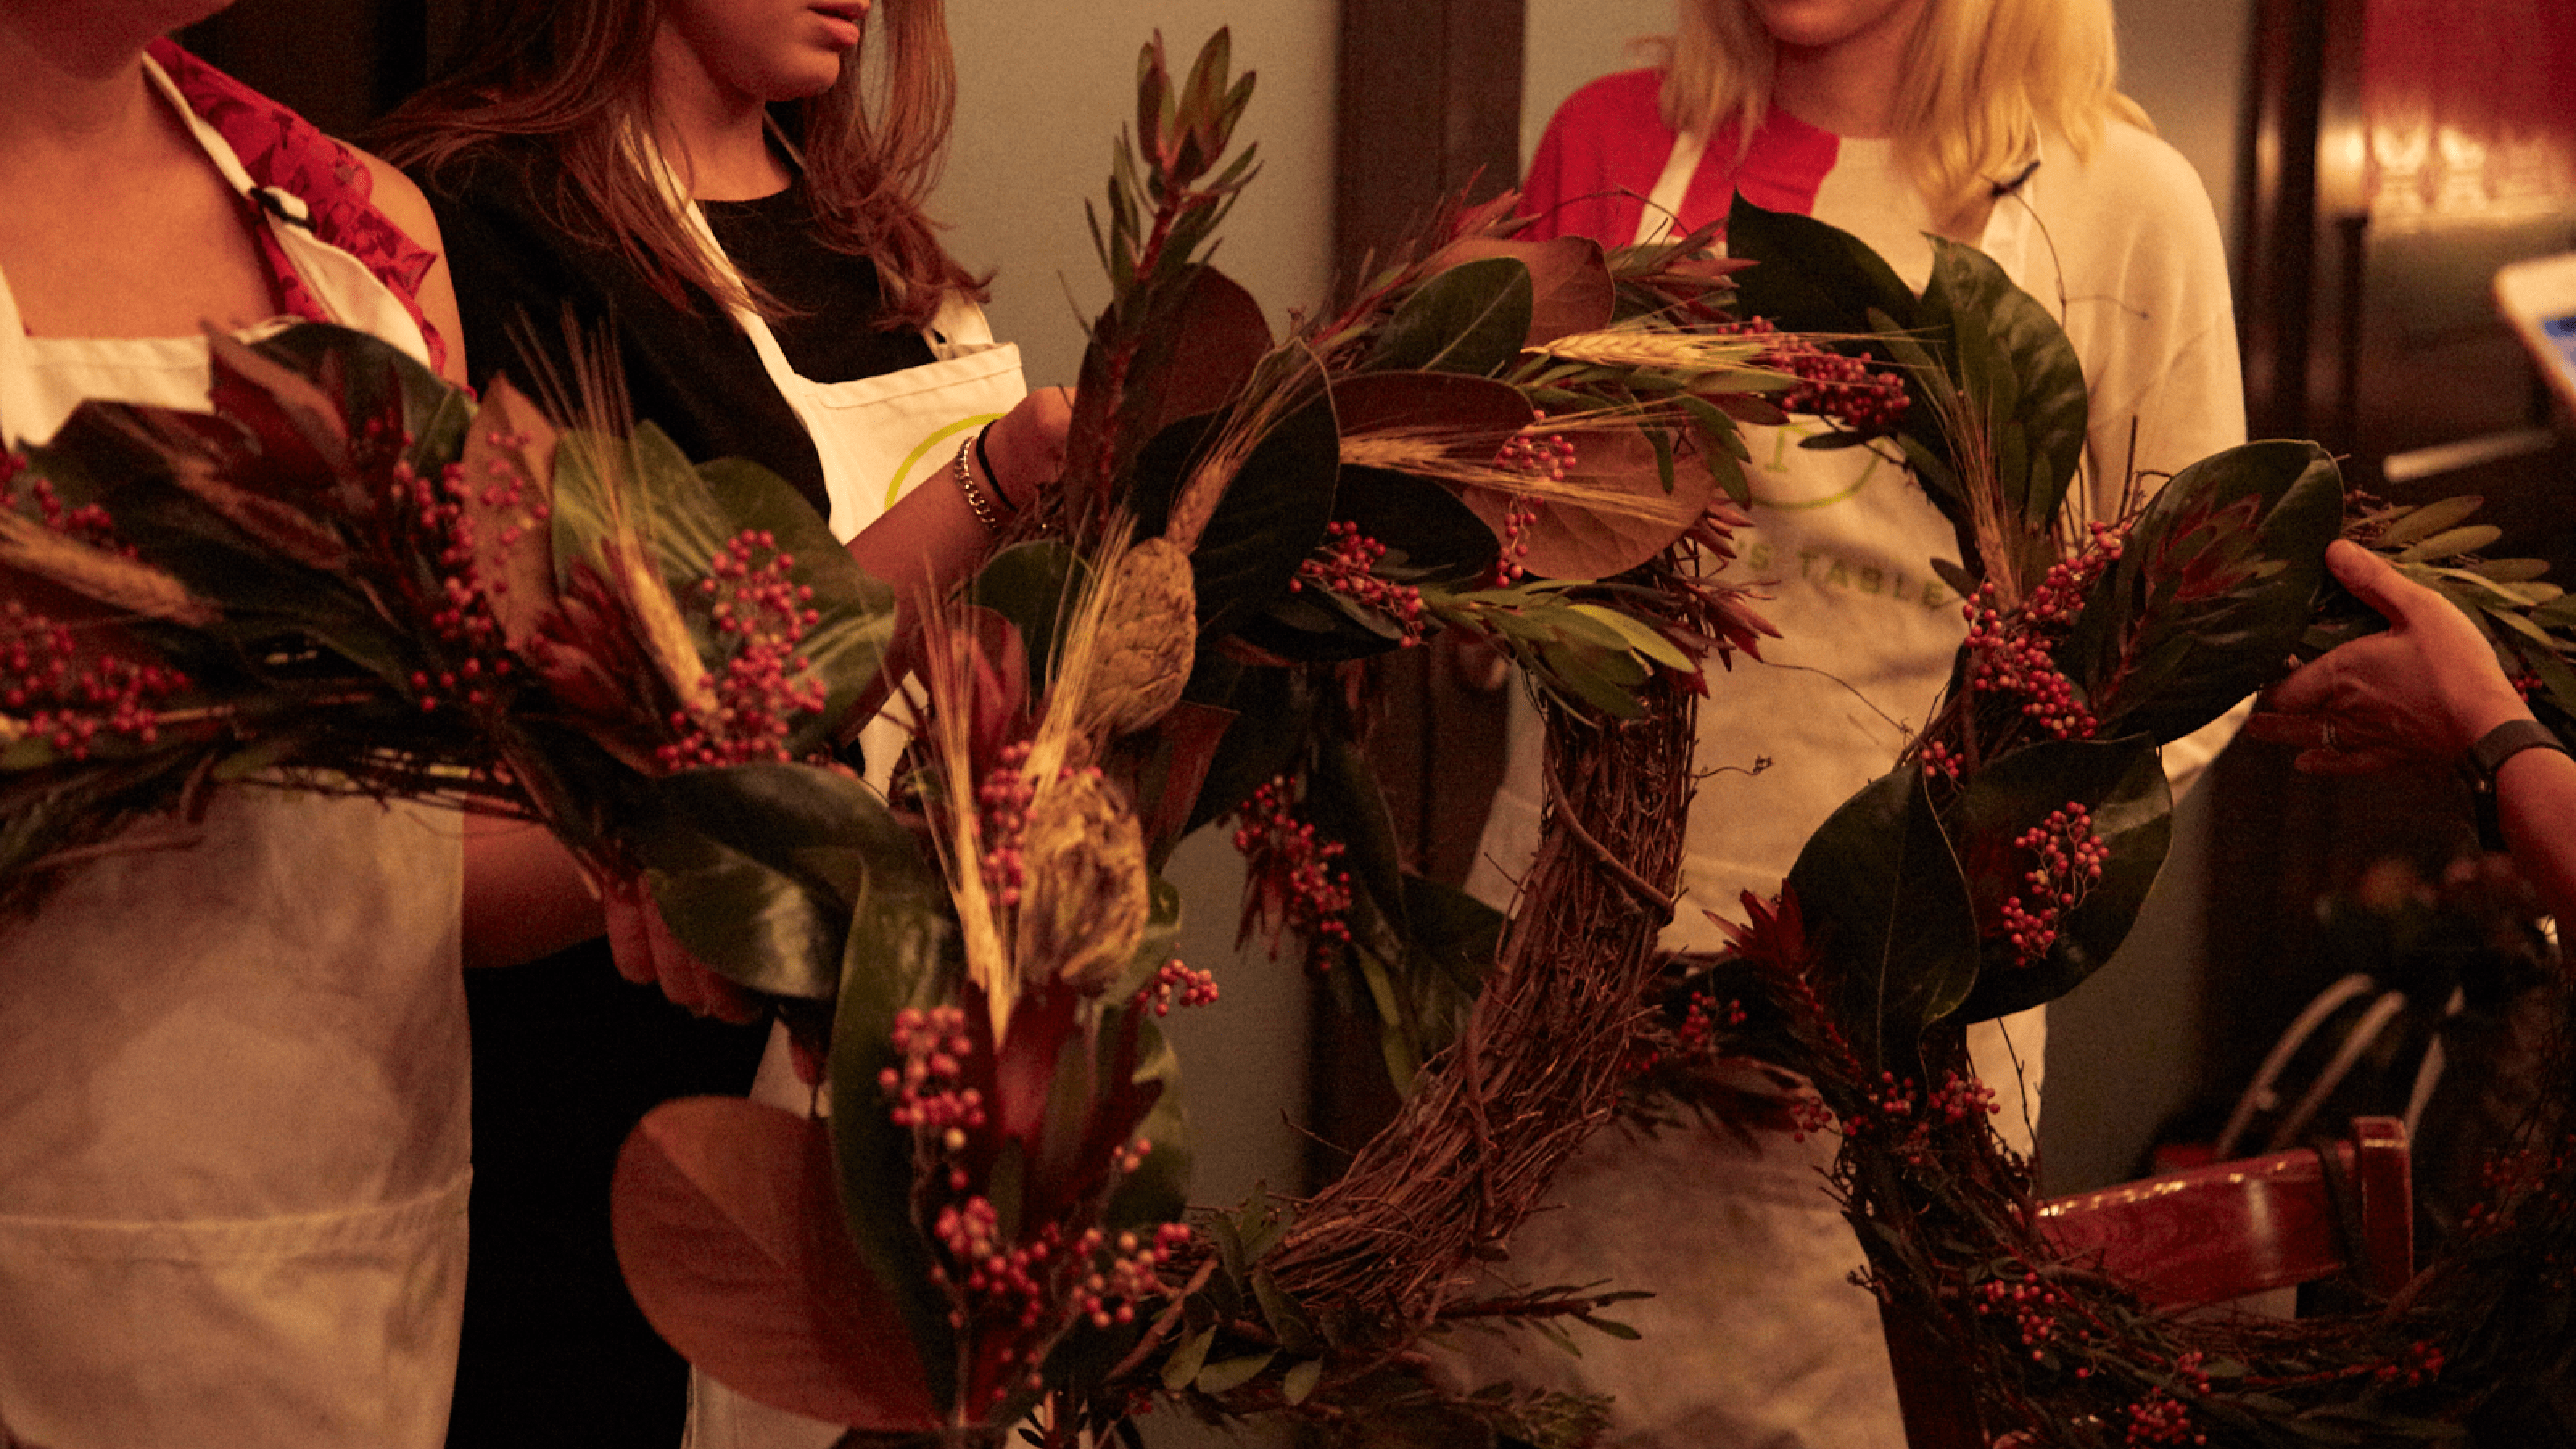 People making wreaths at a holiday party